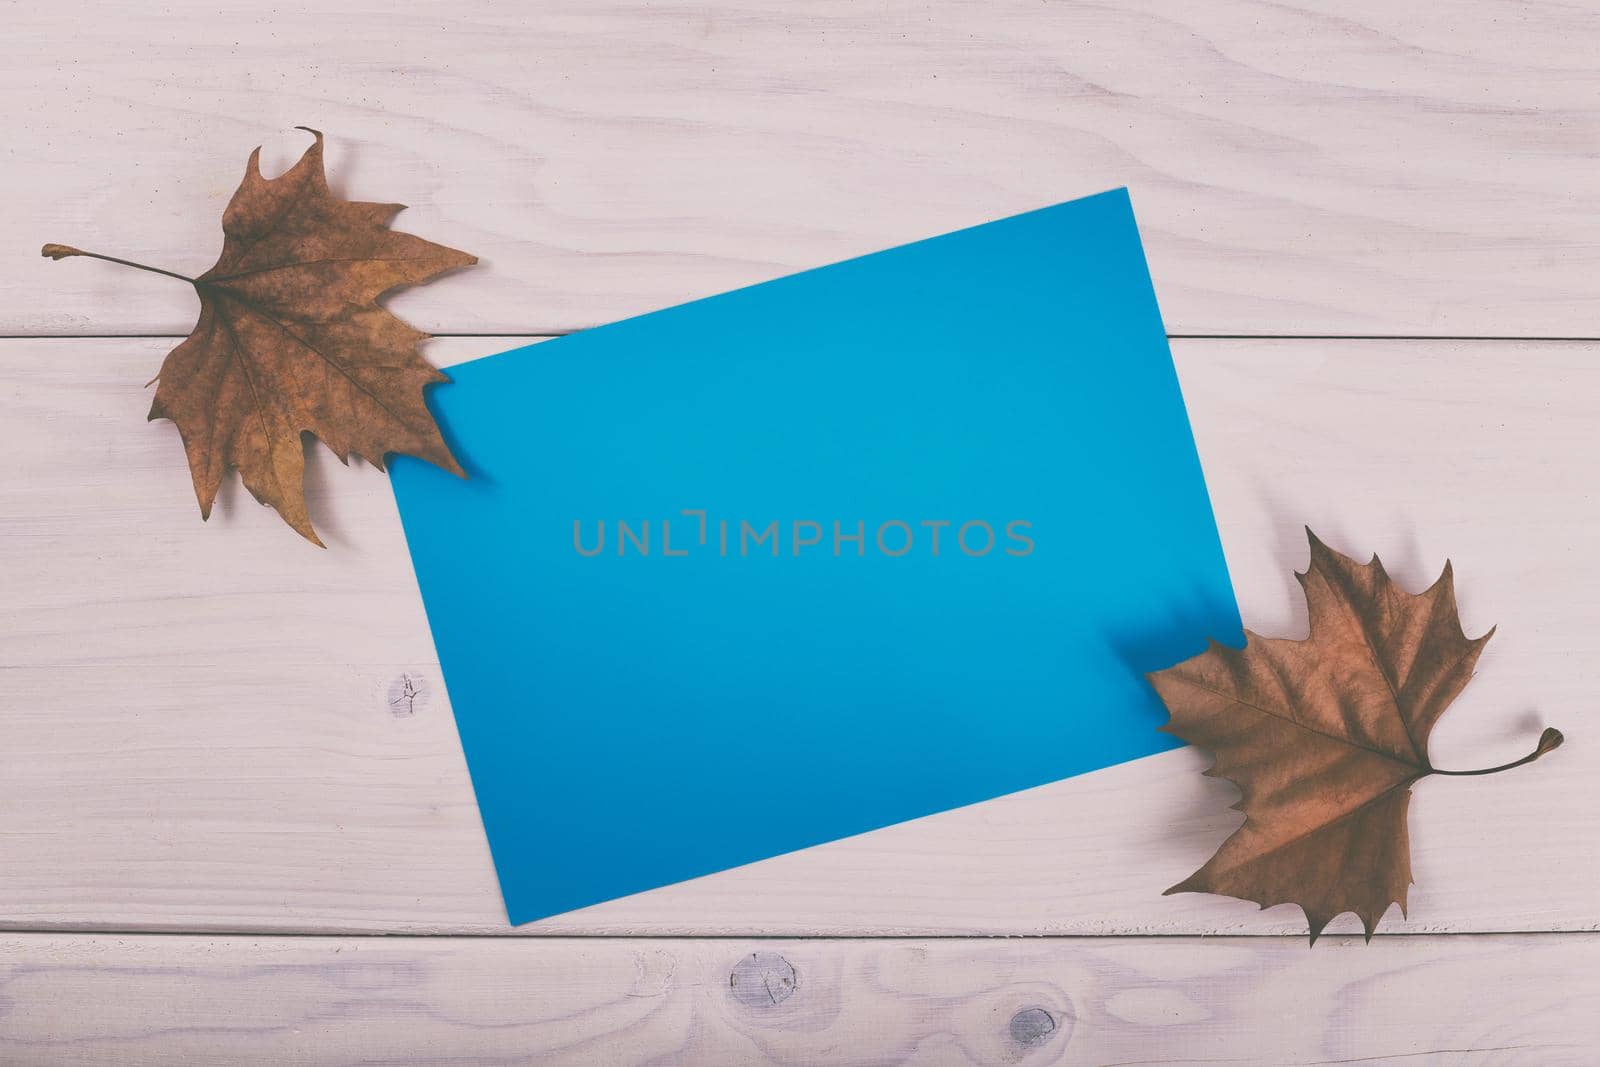 Empty blue paper on wooden table with autumn leaves.Image is intentionally toned